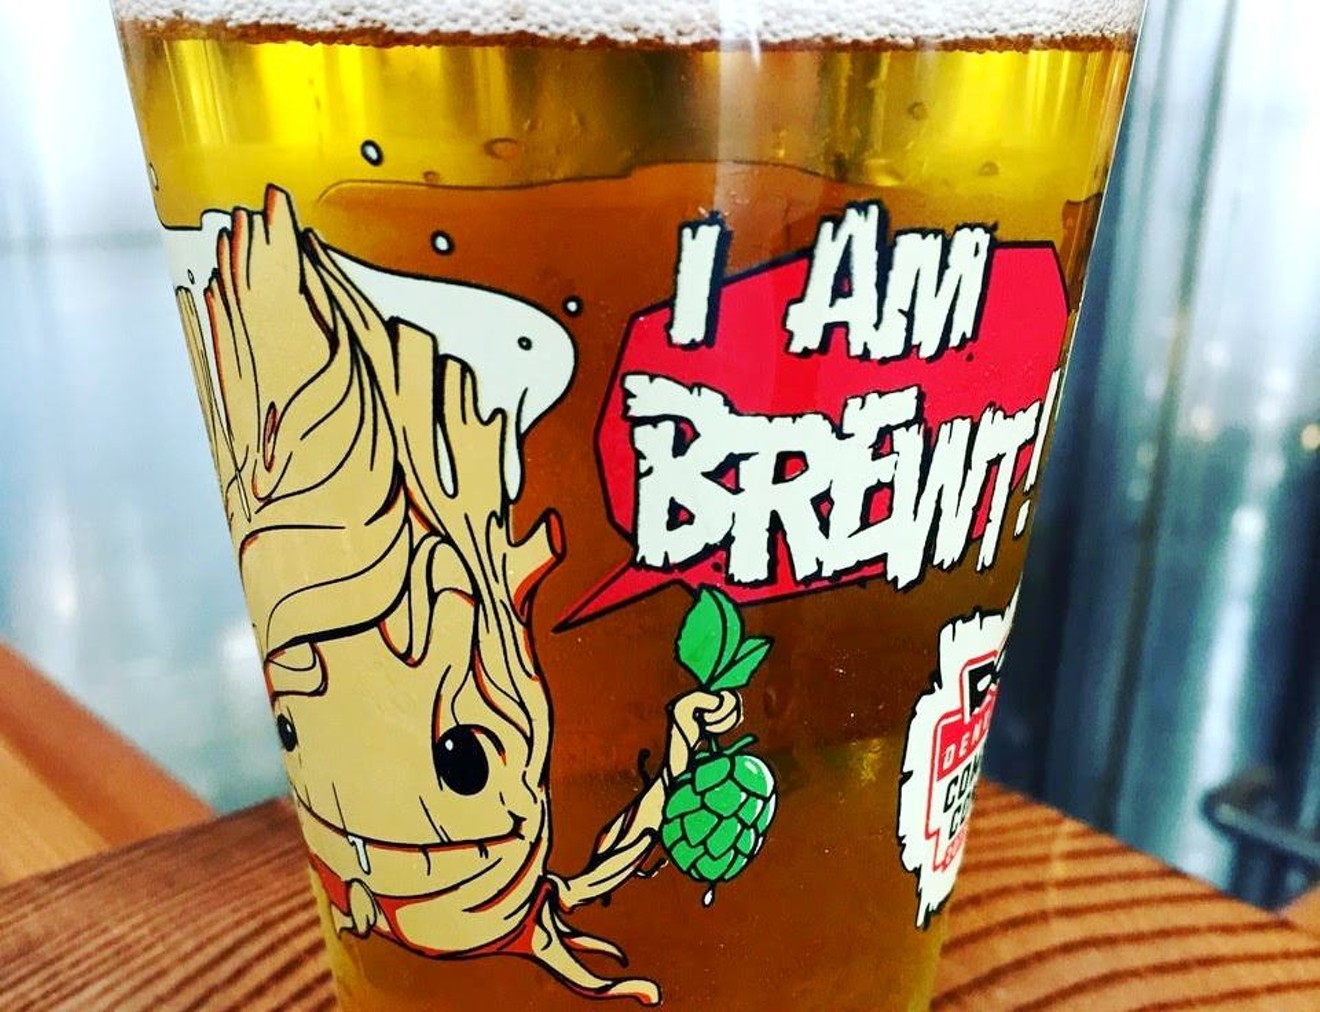 The new Comic Con beer: I Am Brewt!